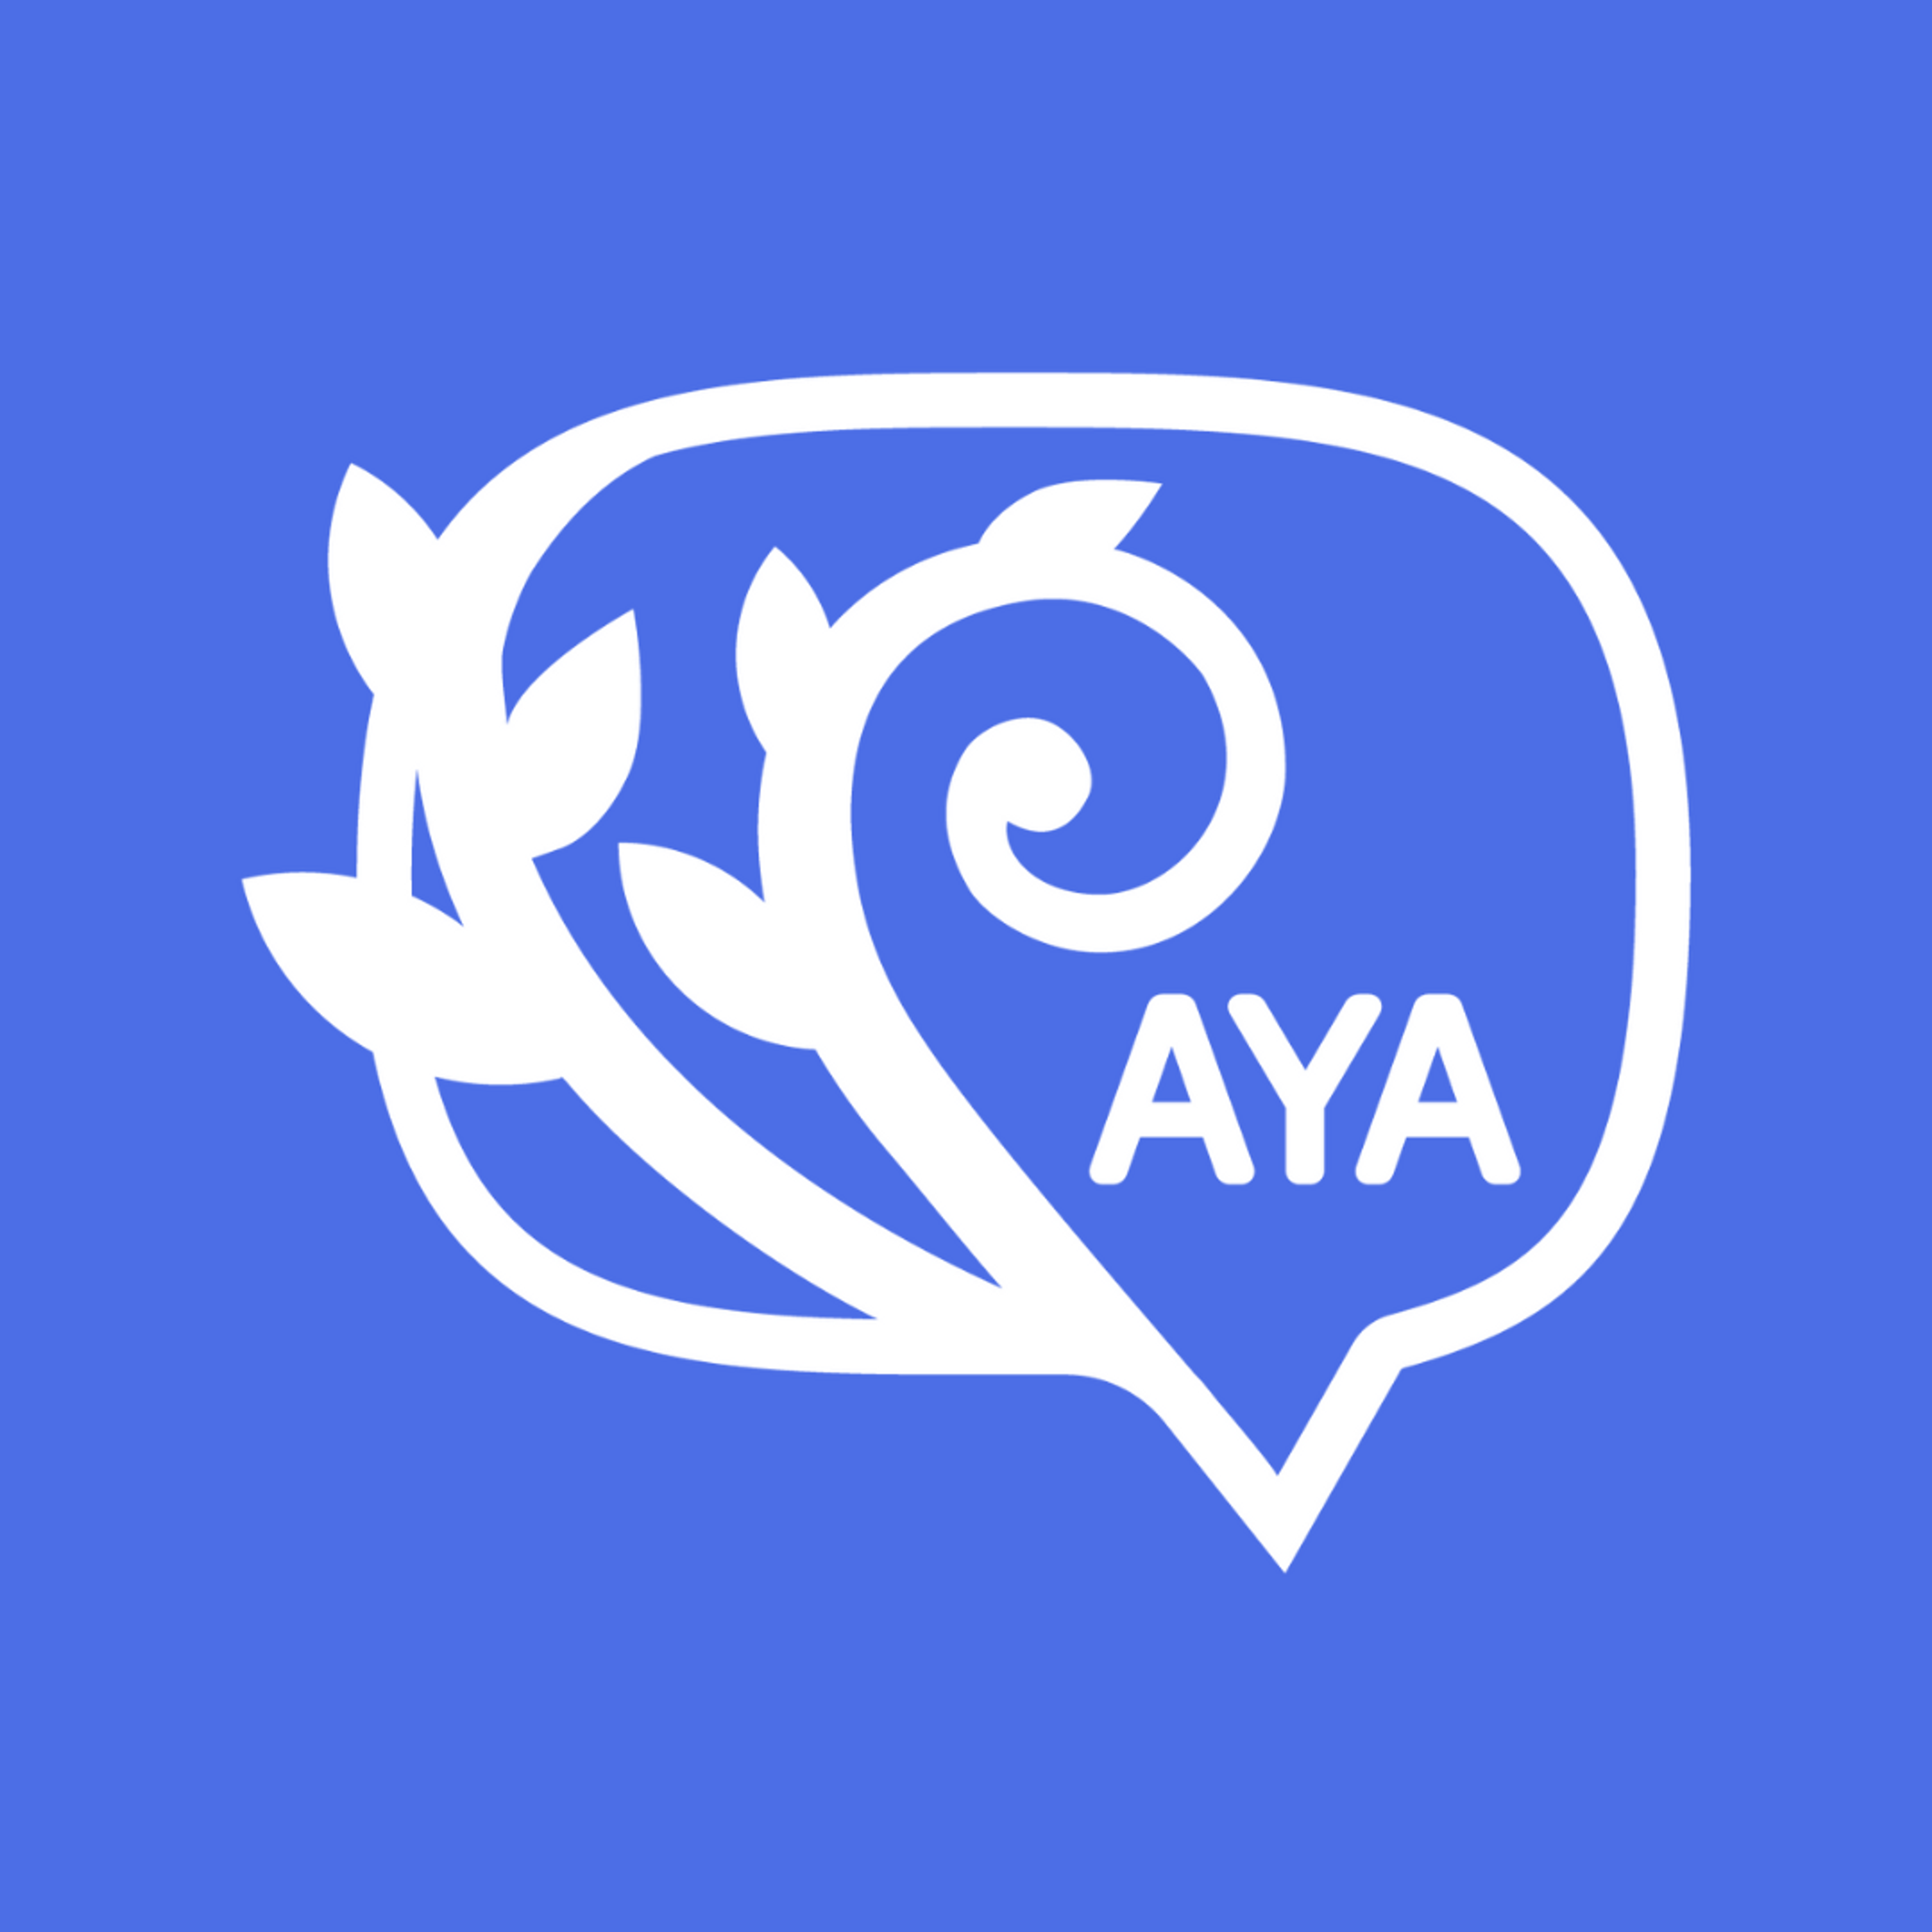 The Aya logo - a speech bubble with a fern growing inside it and the word AYA.